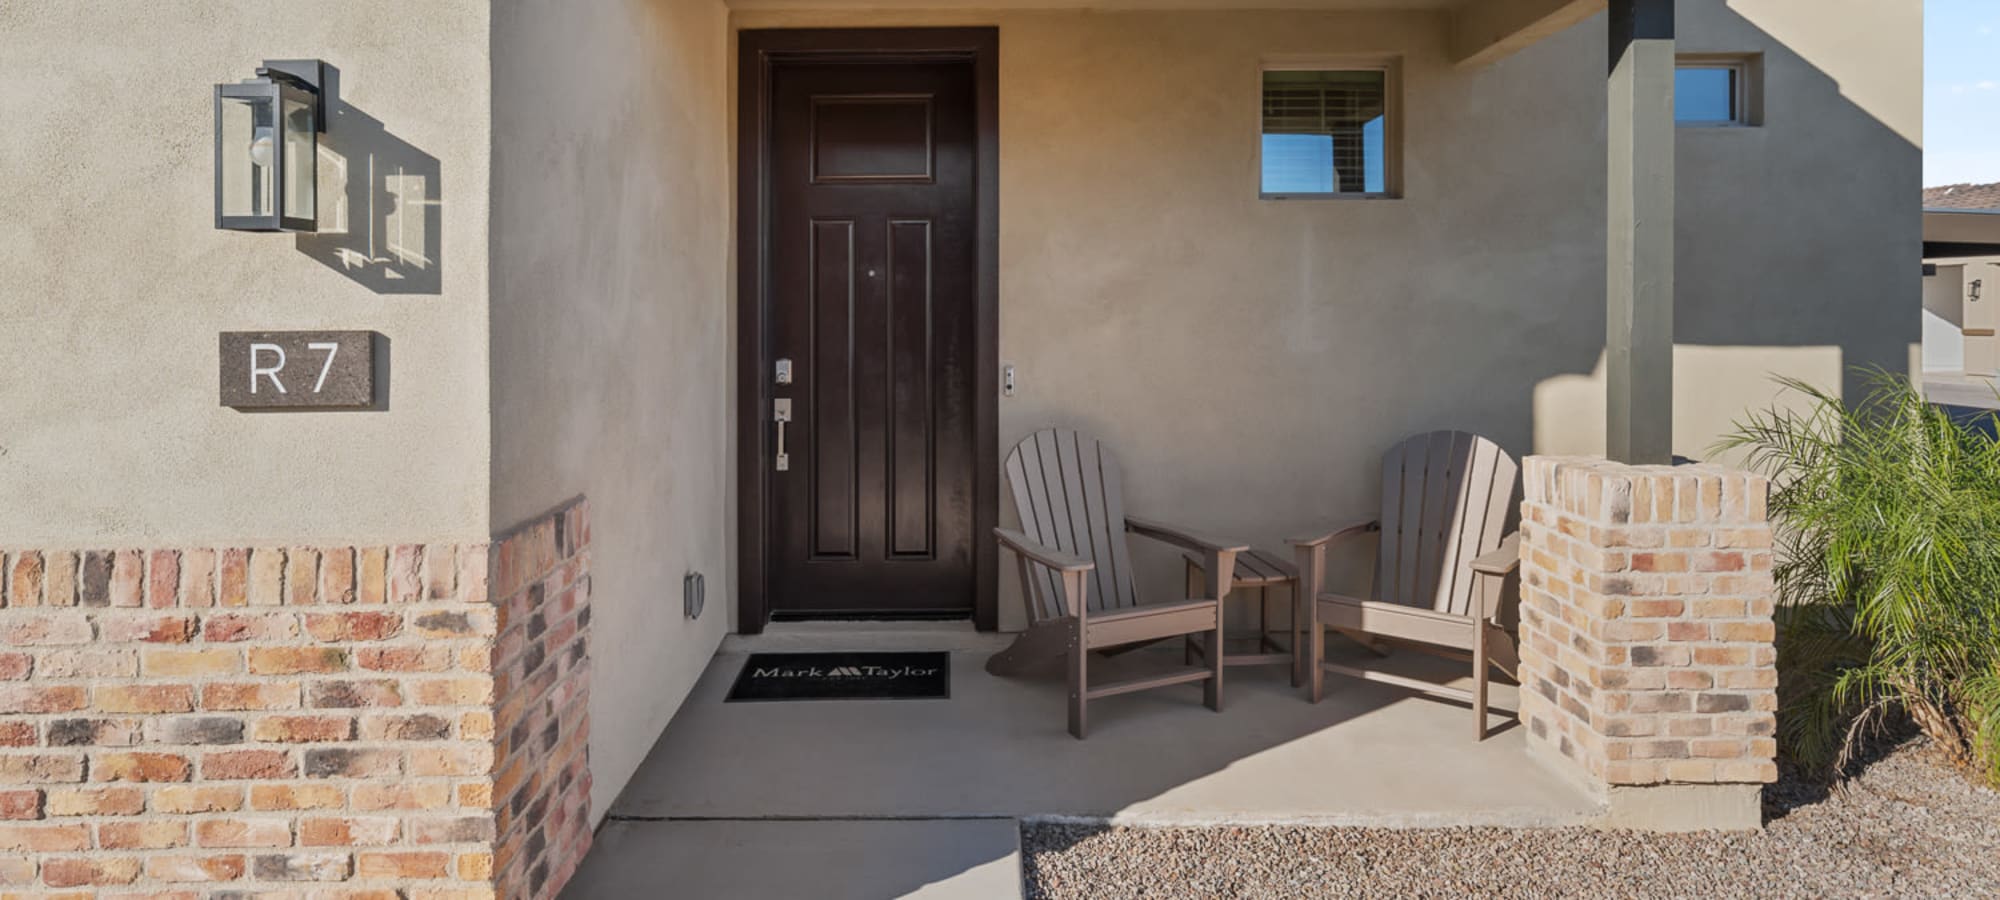 Home entrance at EVR Porter home in Maricopa, Arizona